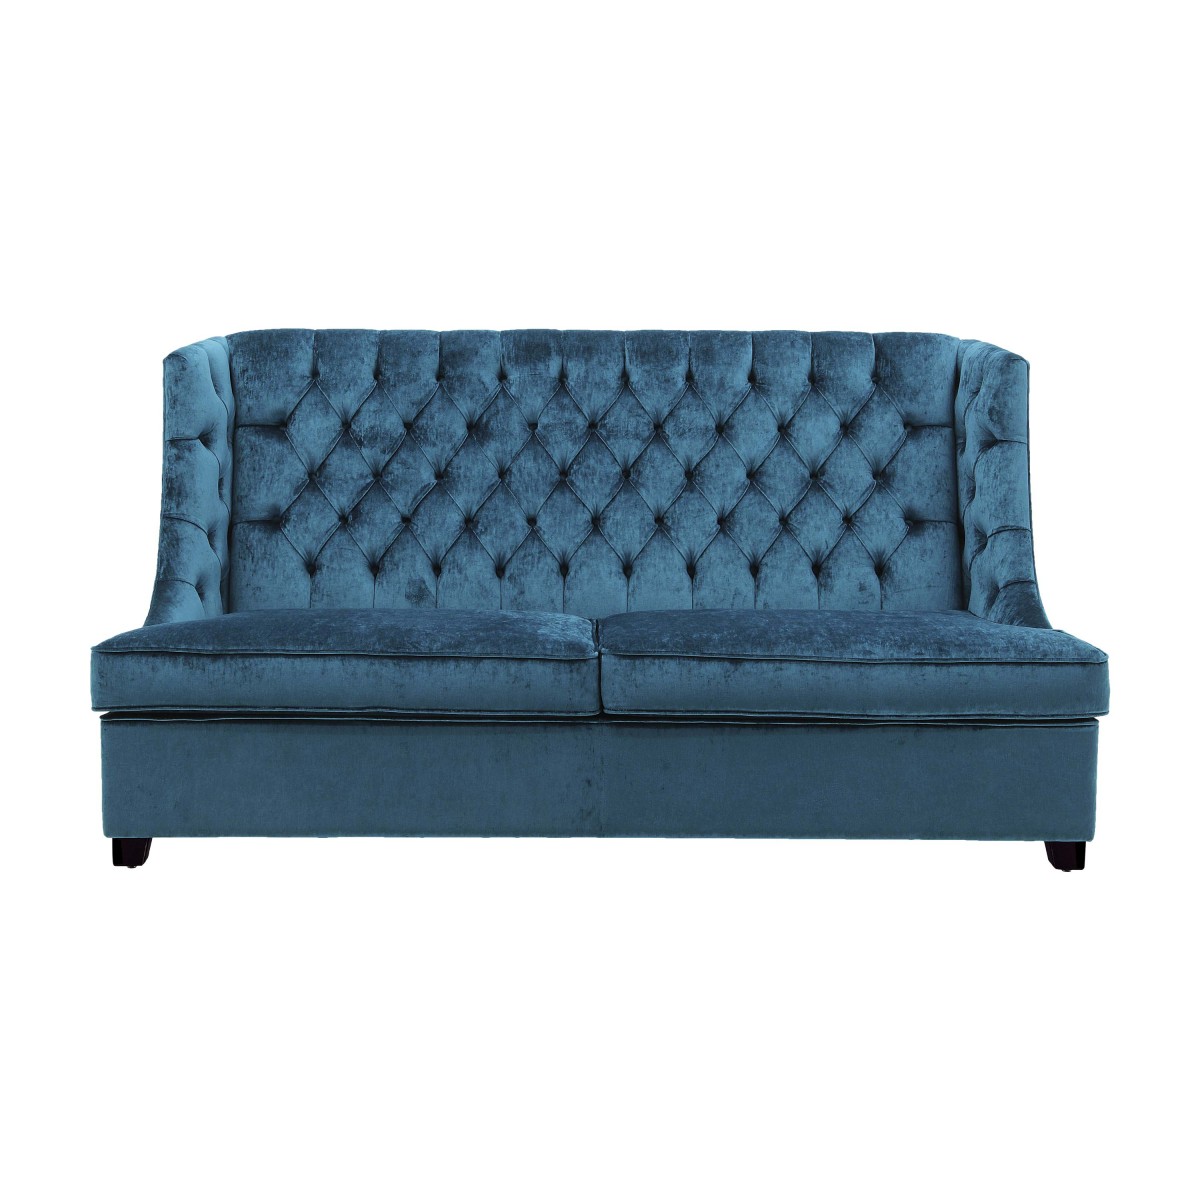 Italian sofa bed with tufted back,blue,3 seater, sleeper couch, with pull out mattress, double bed